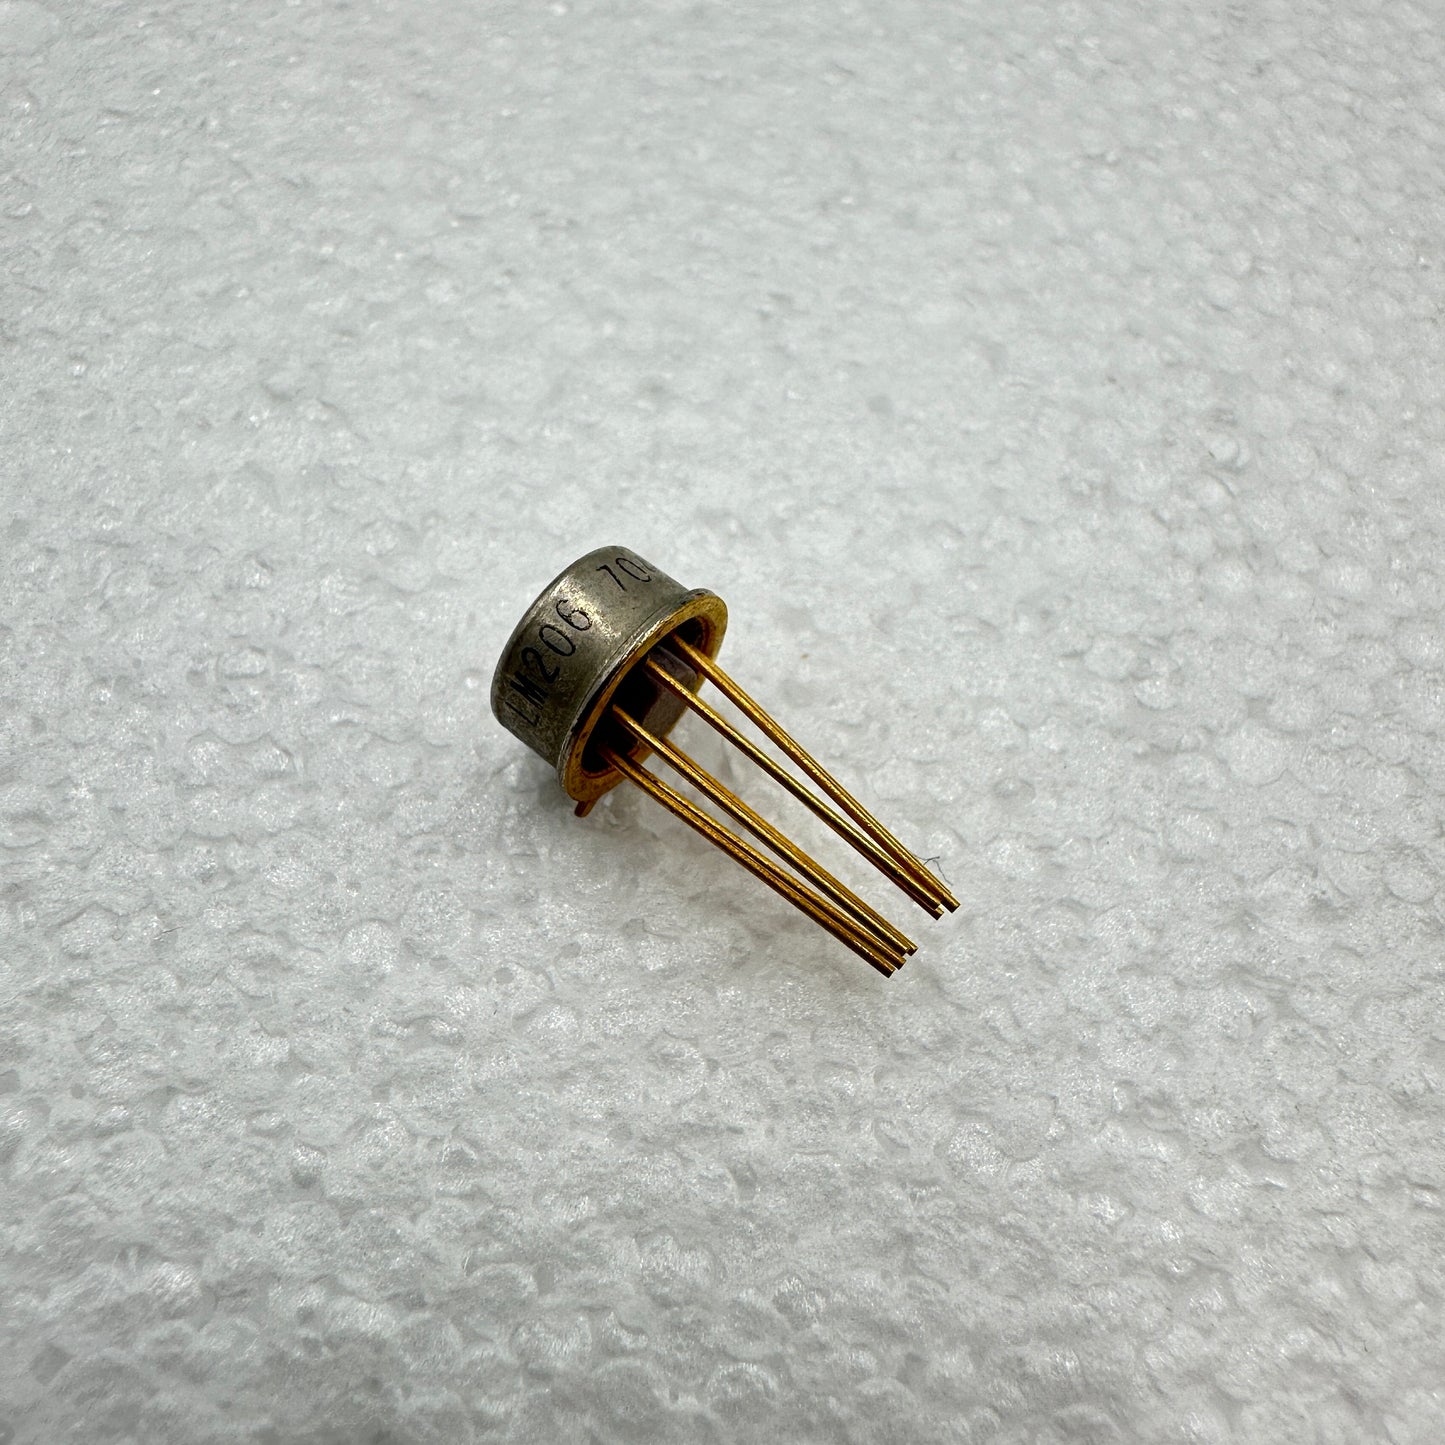 LM206 TO-99 Metal Can Gold Leads Military Spec Voltage Comparator NS LM 206